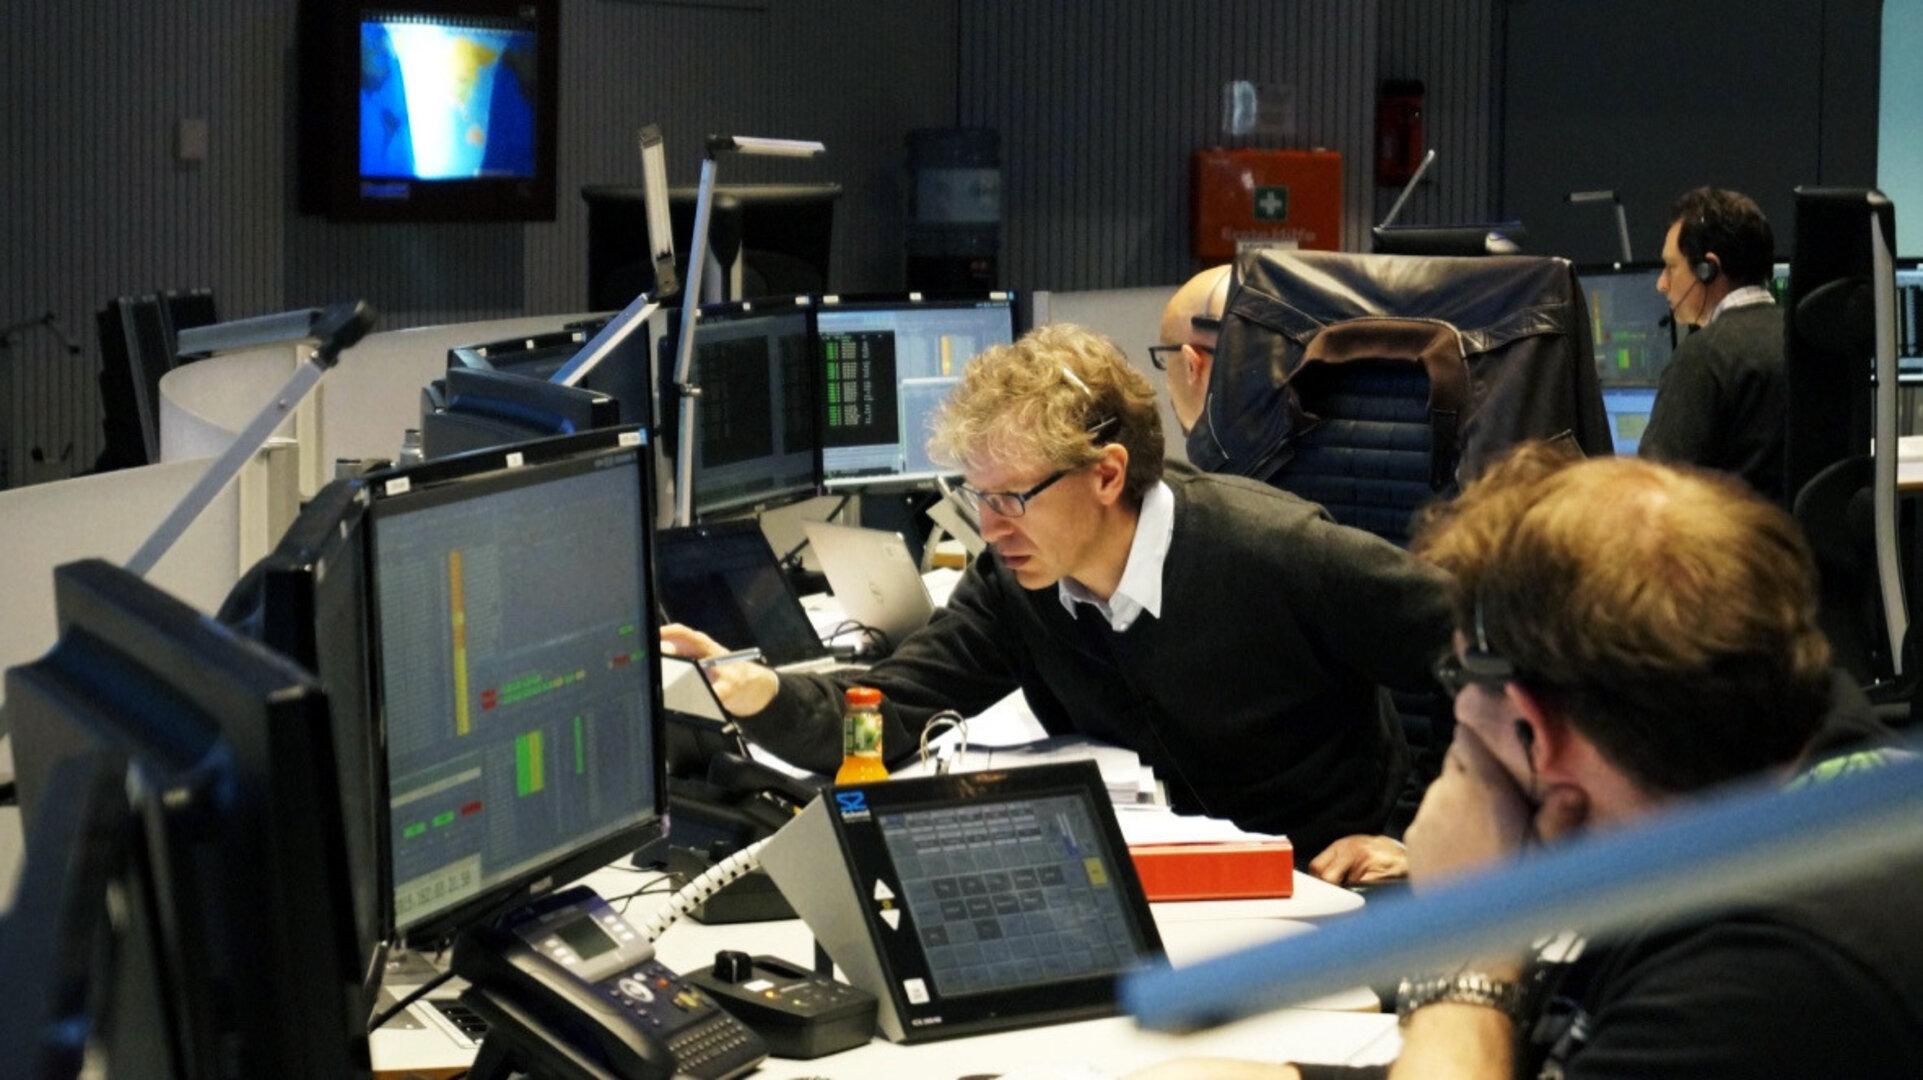 Sentinel-2 team in simulation training for launch